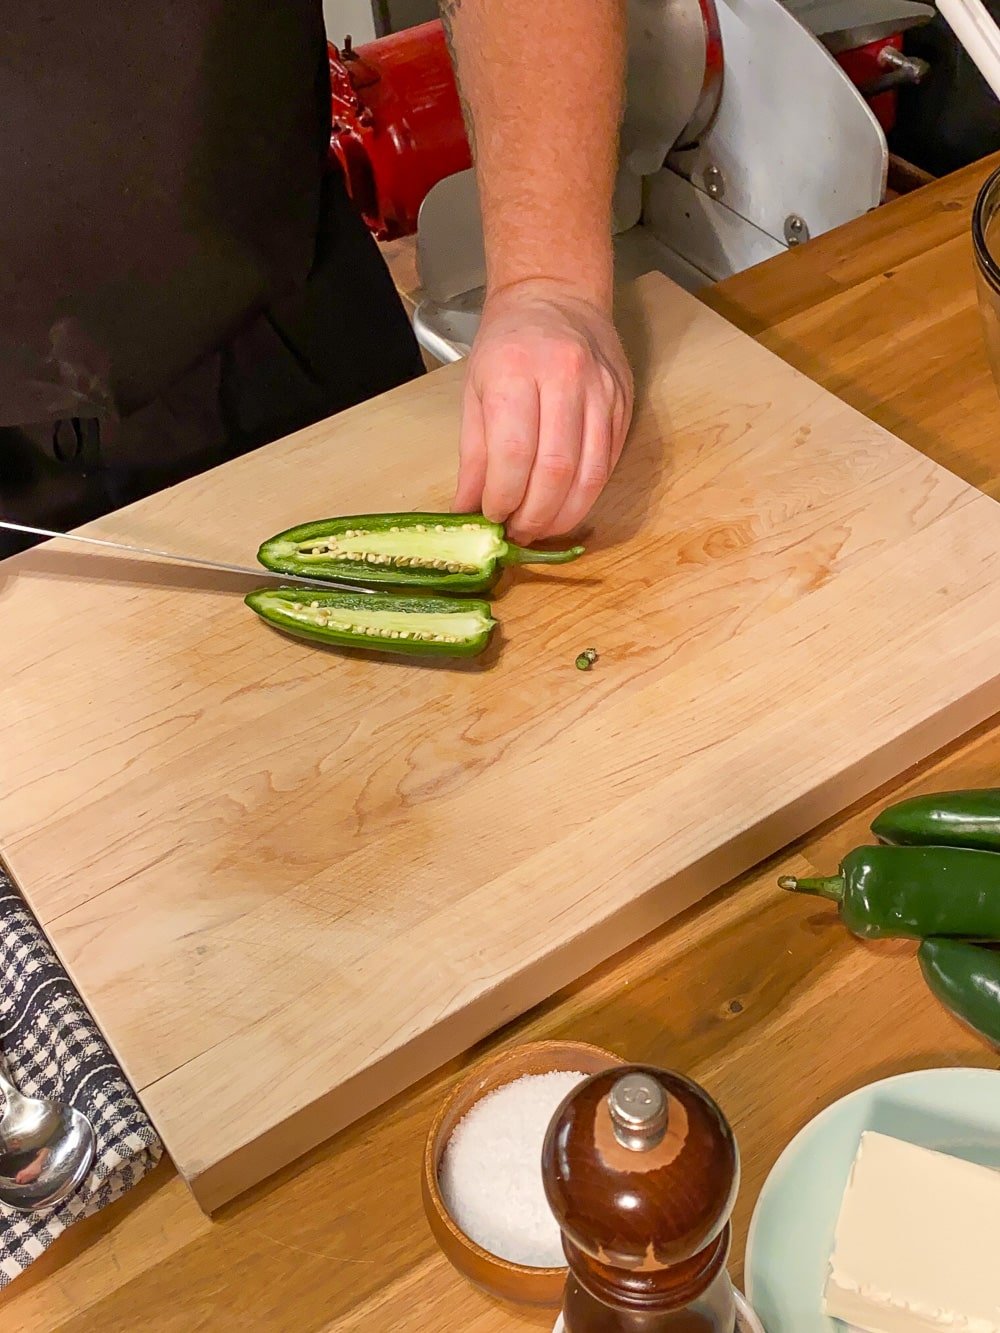 Cutting the jalapenos in half.